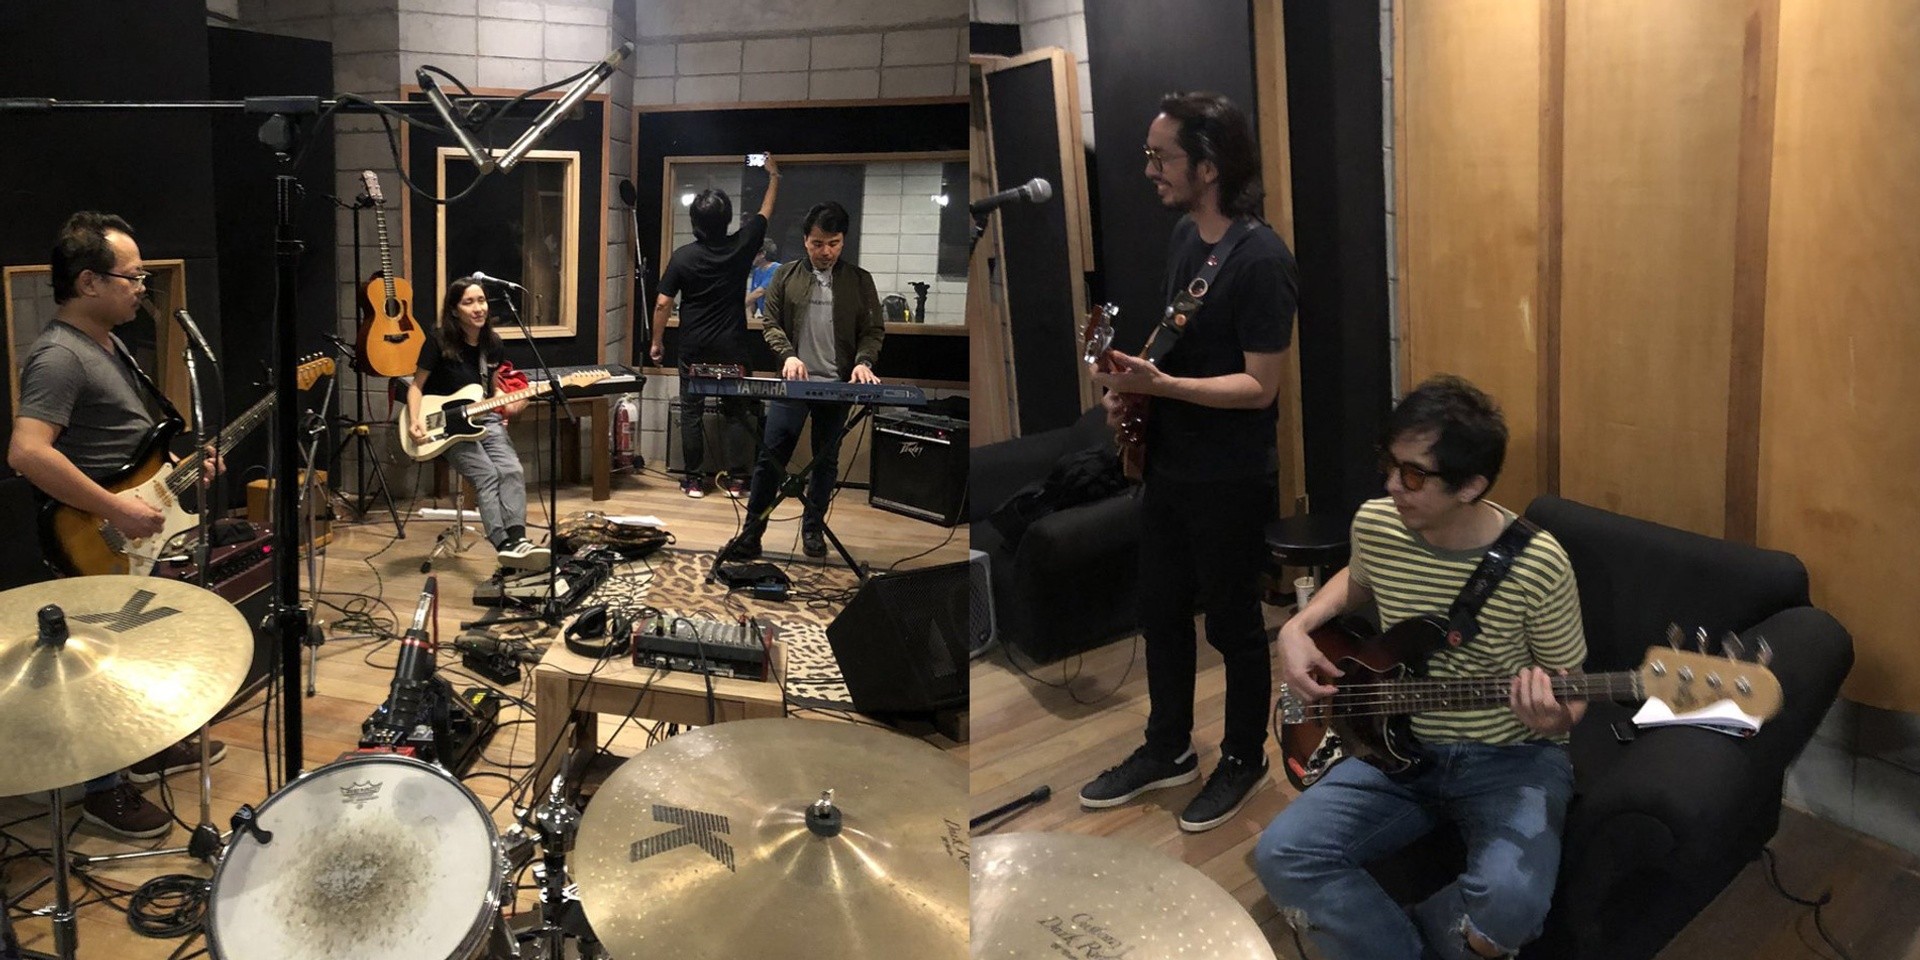 These six Filipino rock icons just turned a Twitter convo into a 5-hour U2 jam session and a secret show